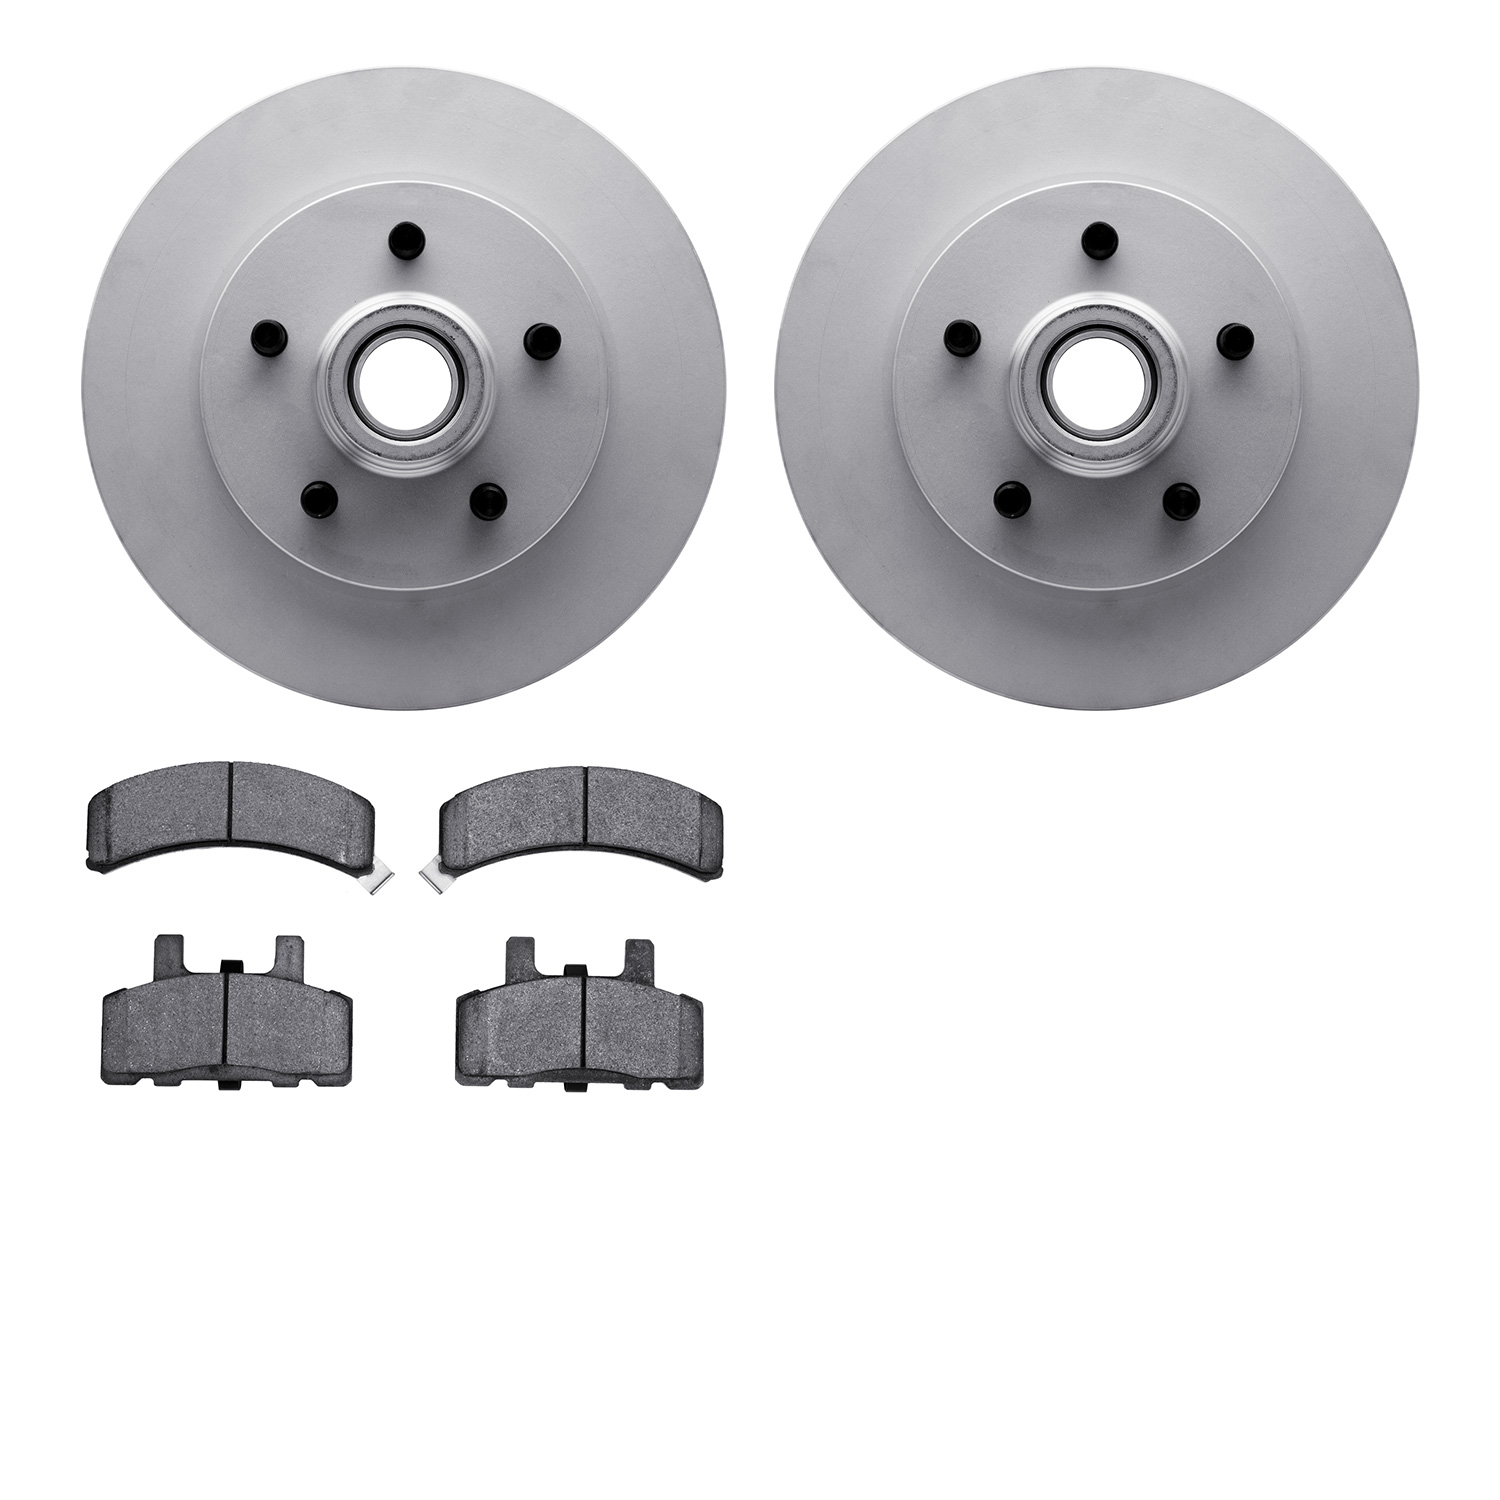 4402-48007 Geospec Brake Rotors with Ultimate-Duty Brake Pads Kit, 1992-2002 GM, Position: Front